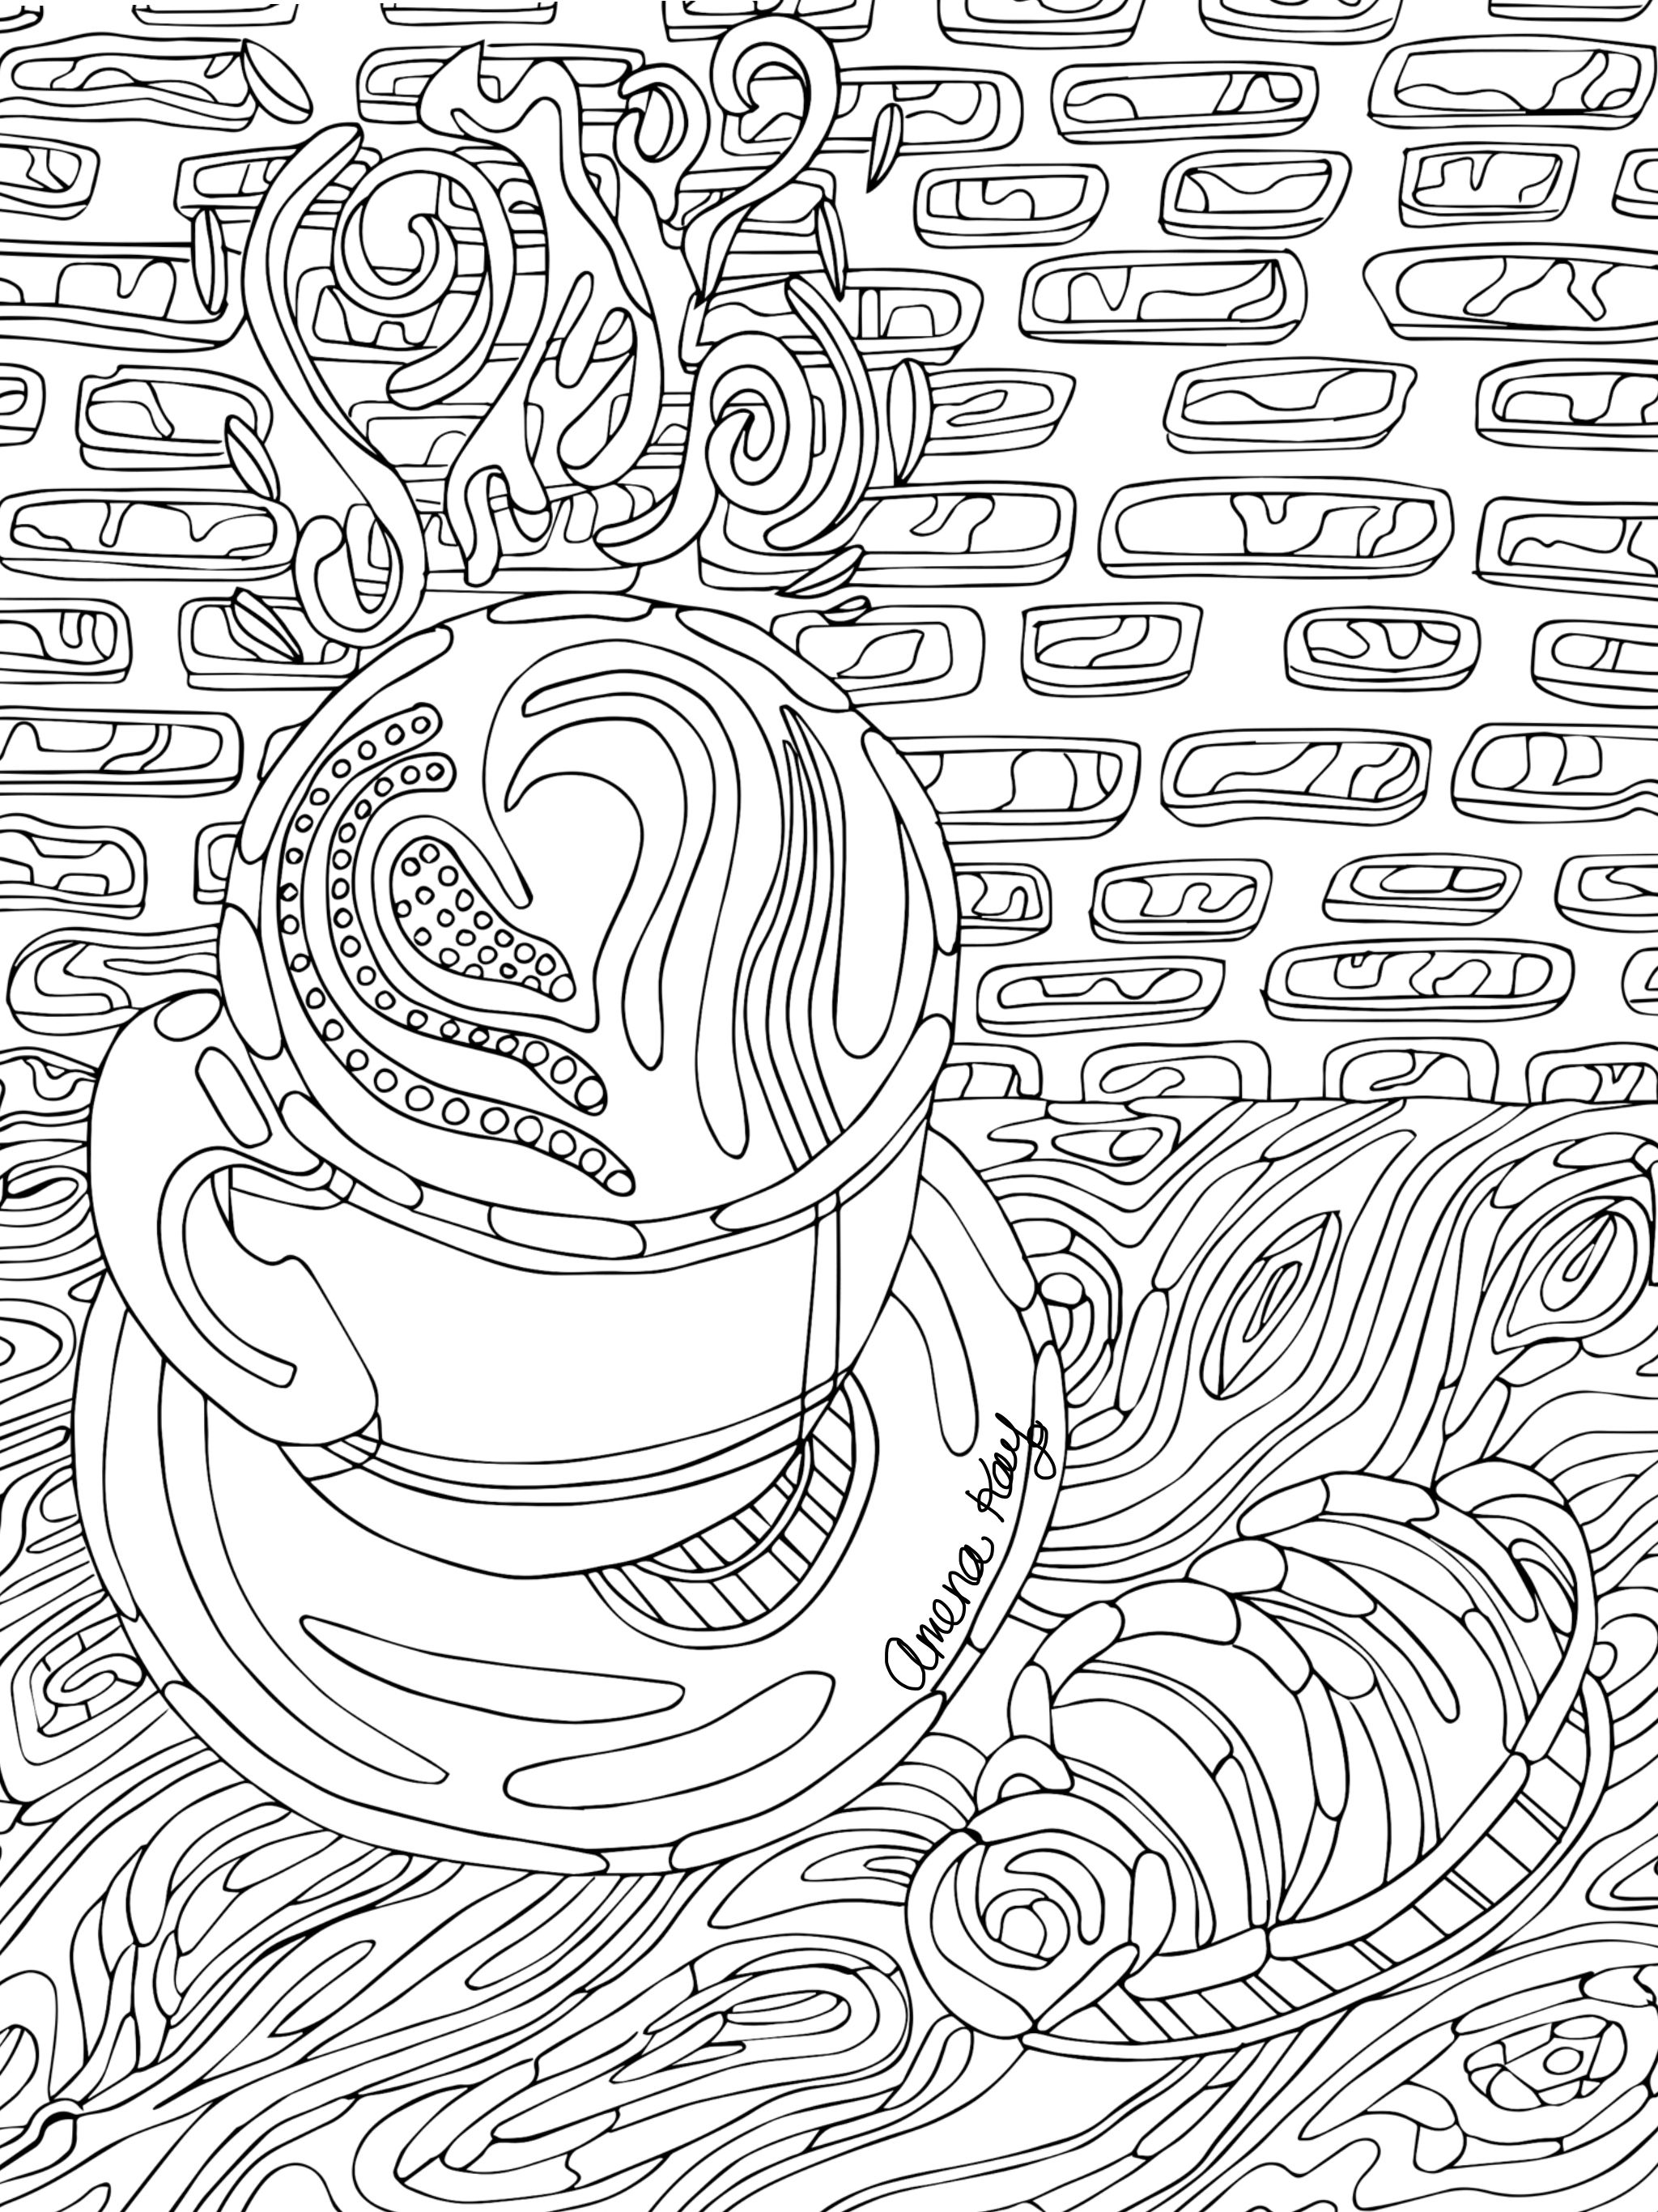 Instagram Coloring Pages at GetColoringscom Free